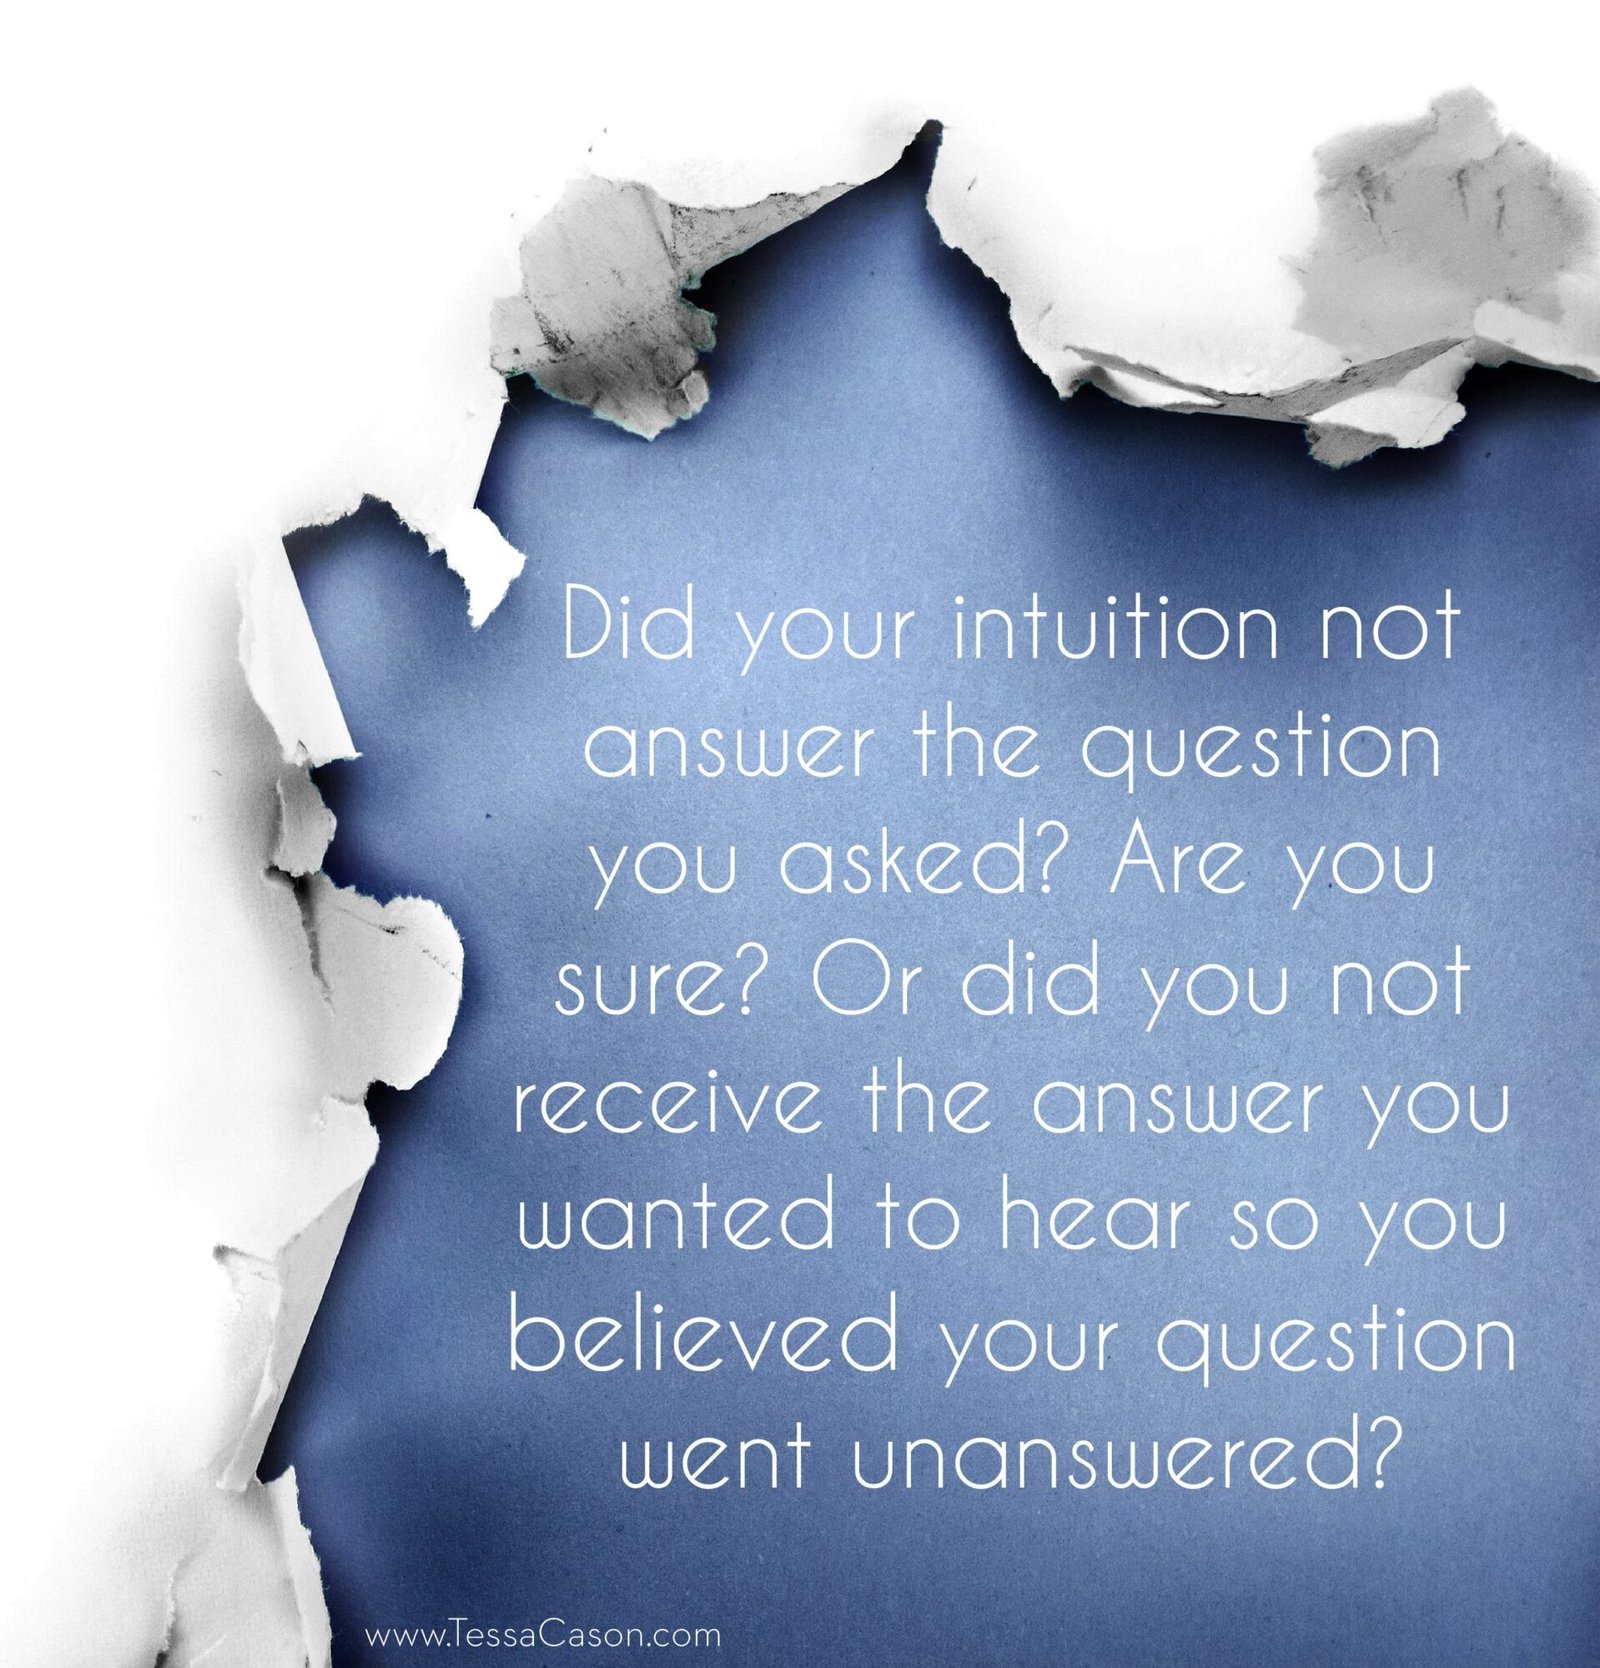 Did your intuition not answer the question you asked